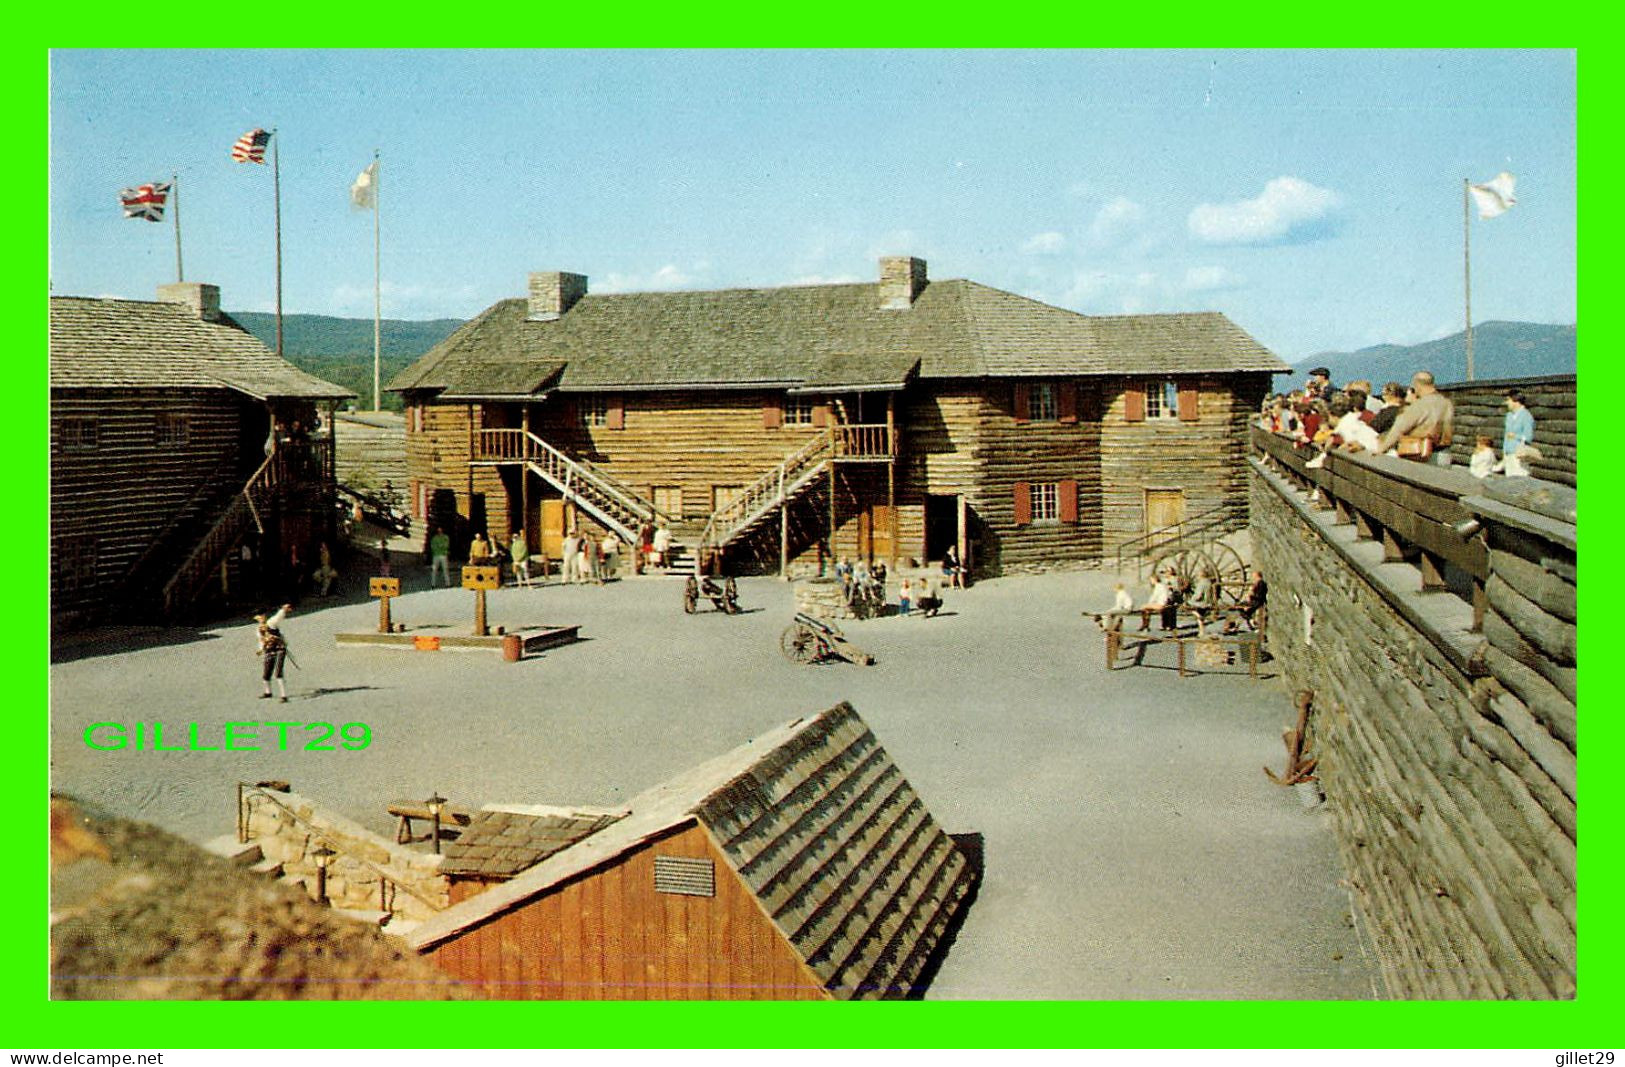 LAKE GEORGE, NY - HISTORIC FORT WILLIAM HENRY IN 1757 - H. S. CROCKER CO INC - - Lake George